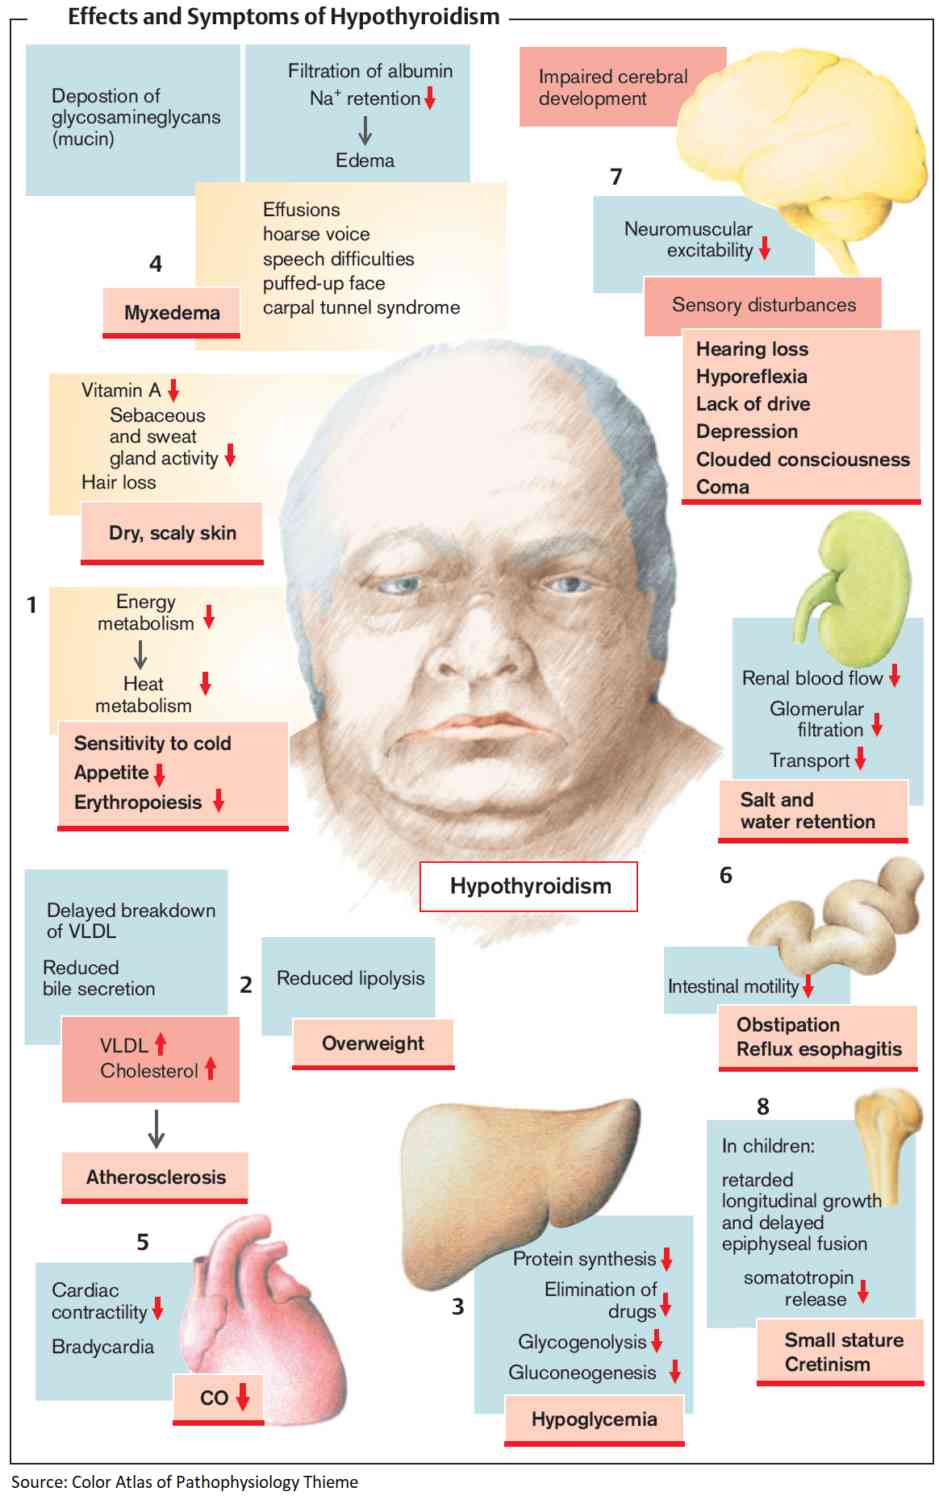 Effects, Symptoms and Signs of Hypothyroidism